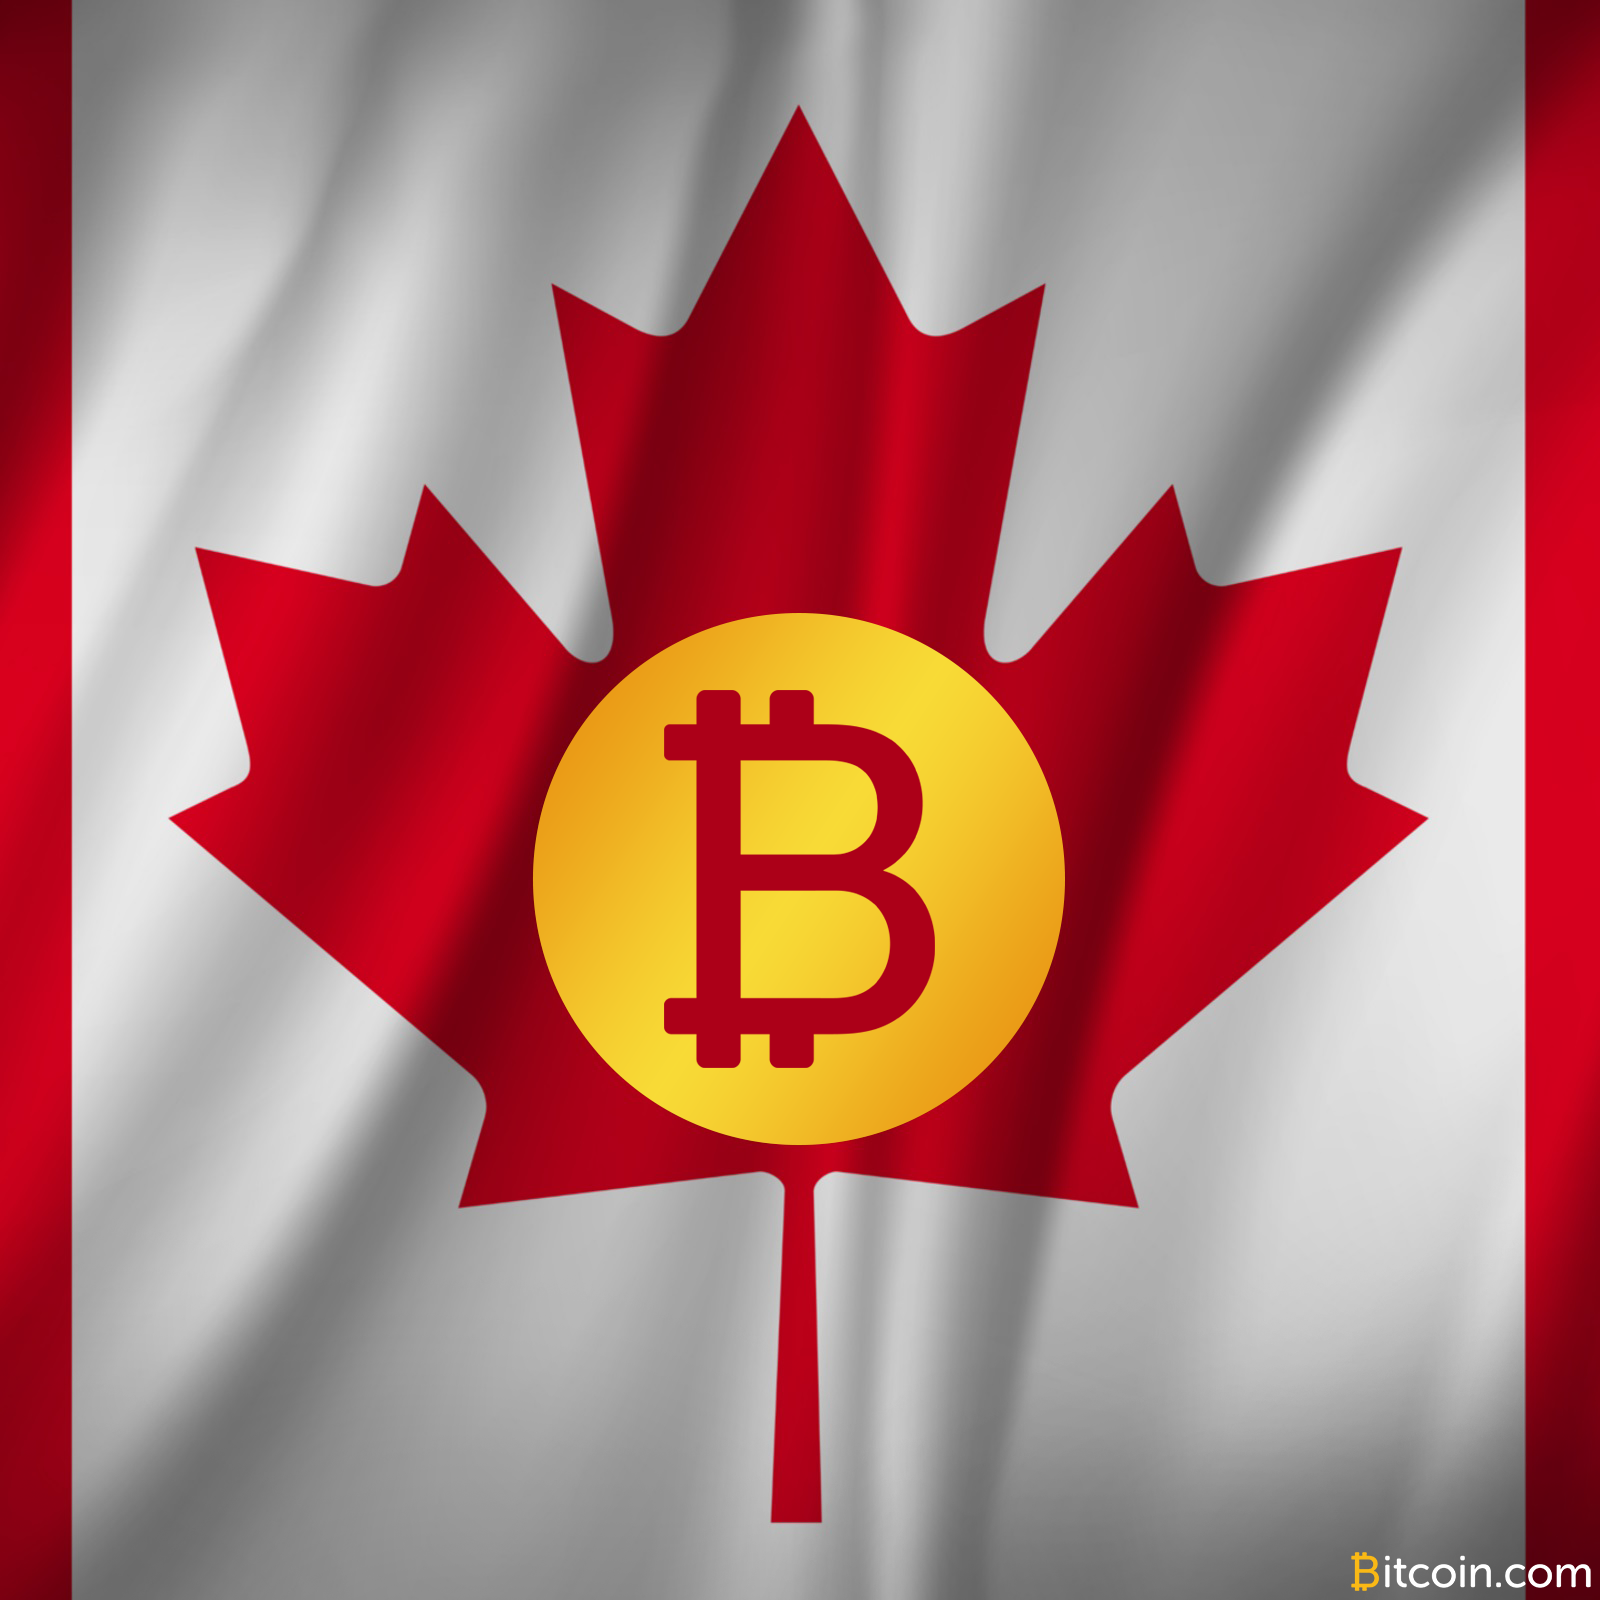 Canadian Securities Commission Grants Bitcoin Fund Manager Registration